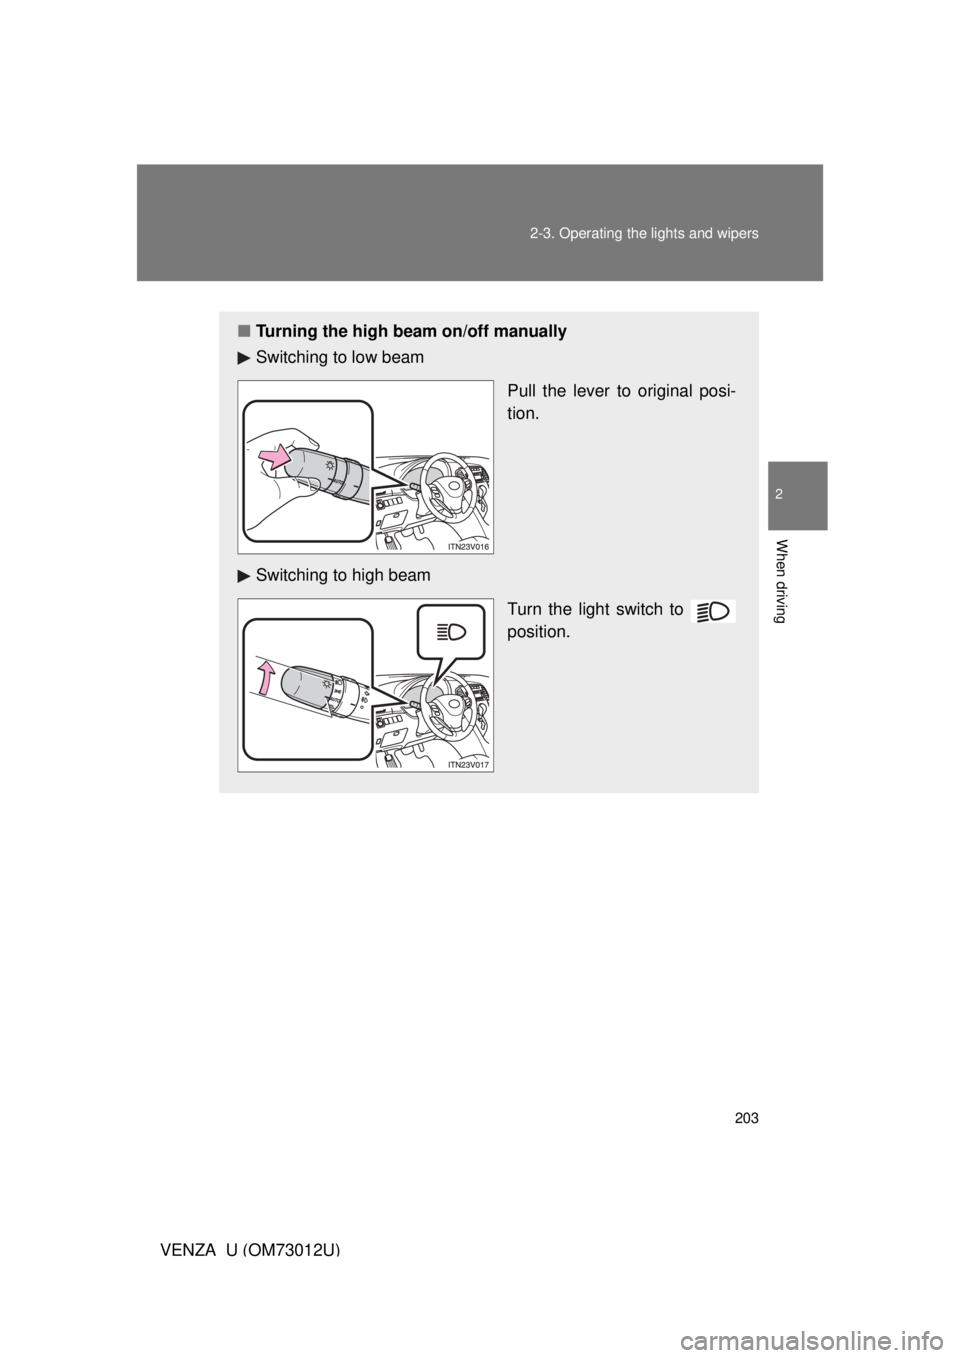 TOYOTA VENZA 2011  Owners Manual (in English) 203
2-3. Operating the lights and wipers
2
When driving
VENZA_U (OM73012U)
■
Turning the high beam on/off manually
Switching to low beam
Pull the lever to original posi-
tion.
Switching to high beam